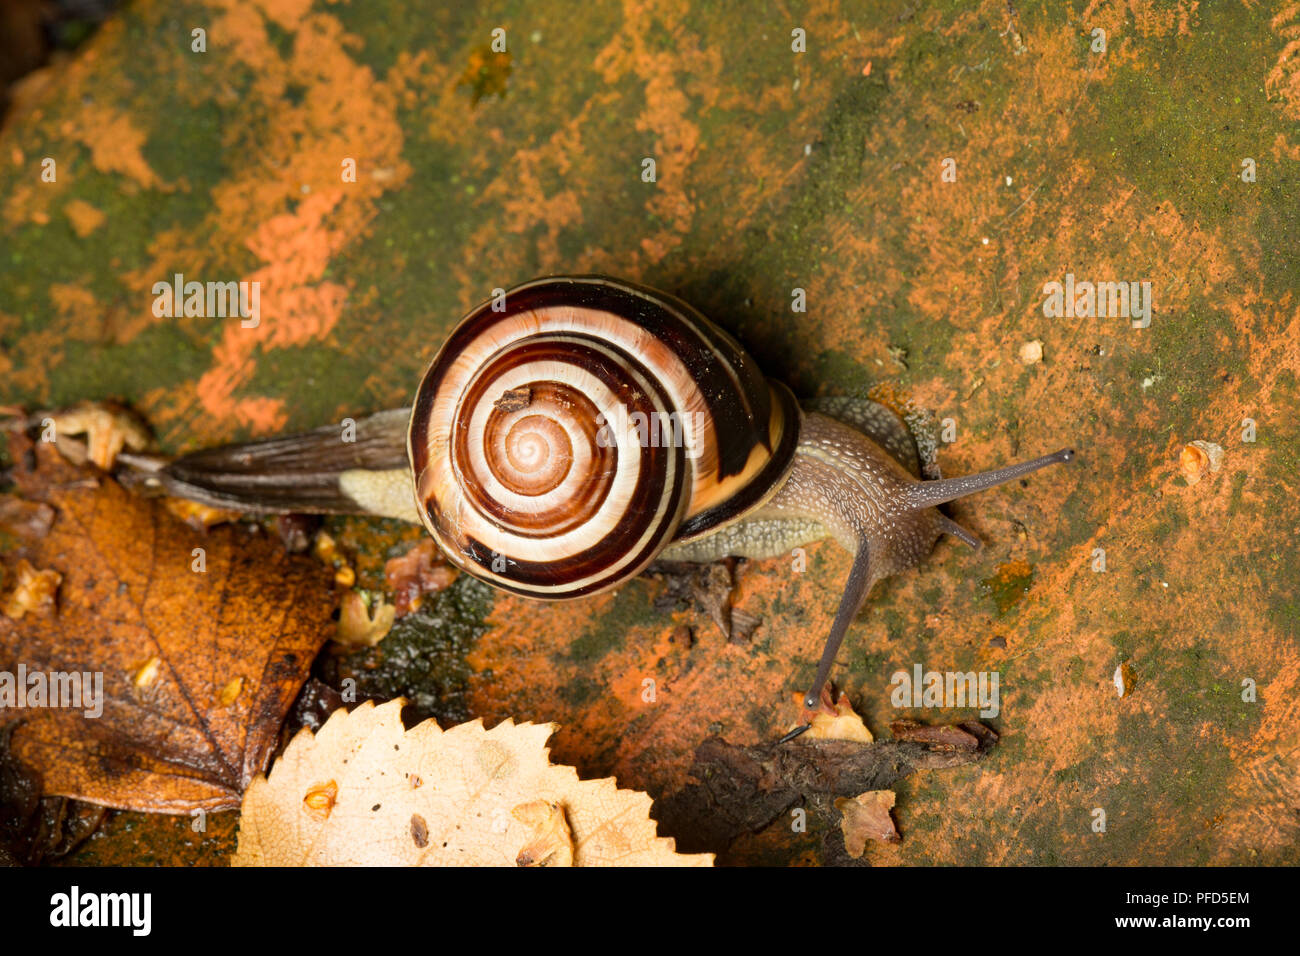 A white-lipped snail, Cepaea hortensis, crawling on an old plant pot in a garden at night. Lancashire North West England UK GB Stock Photo